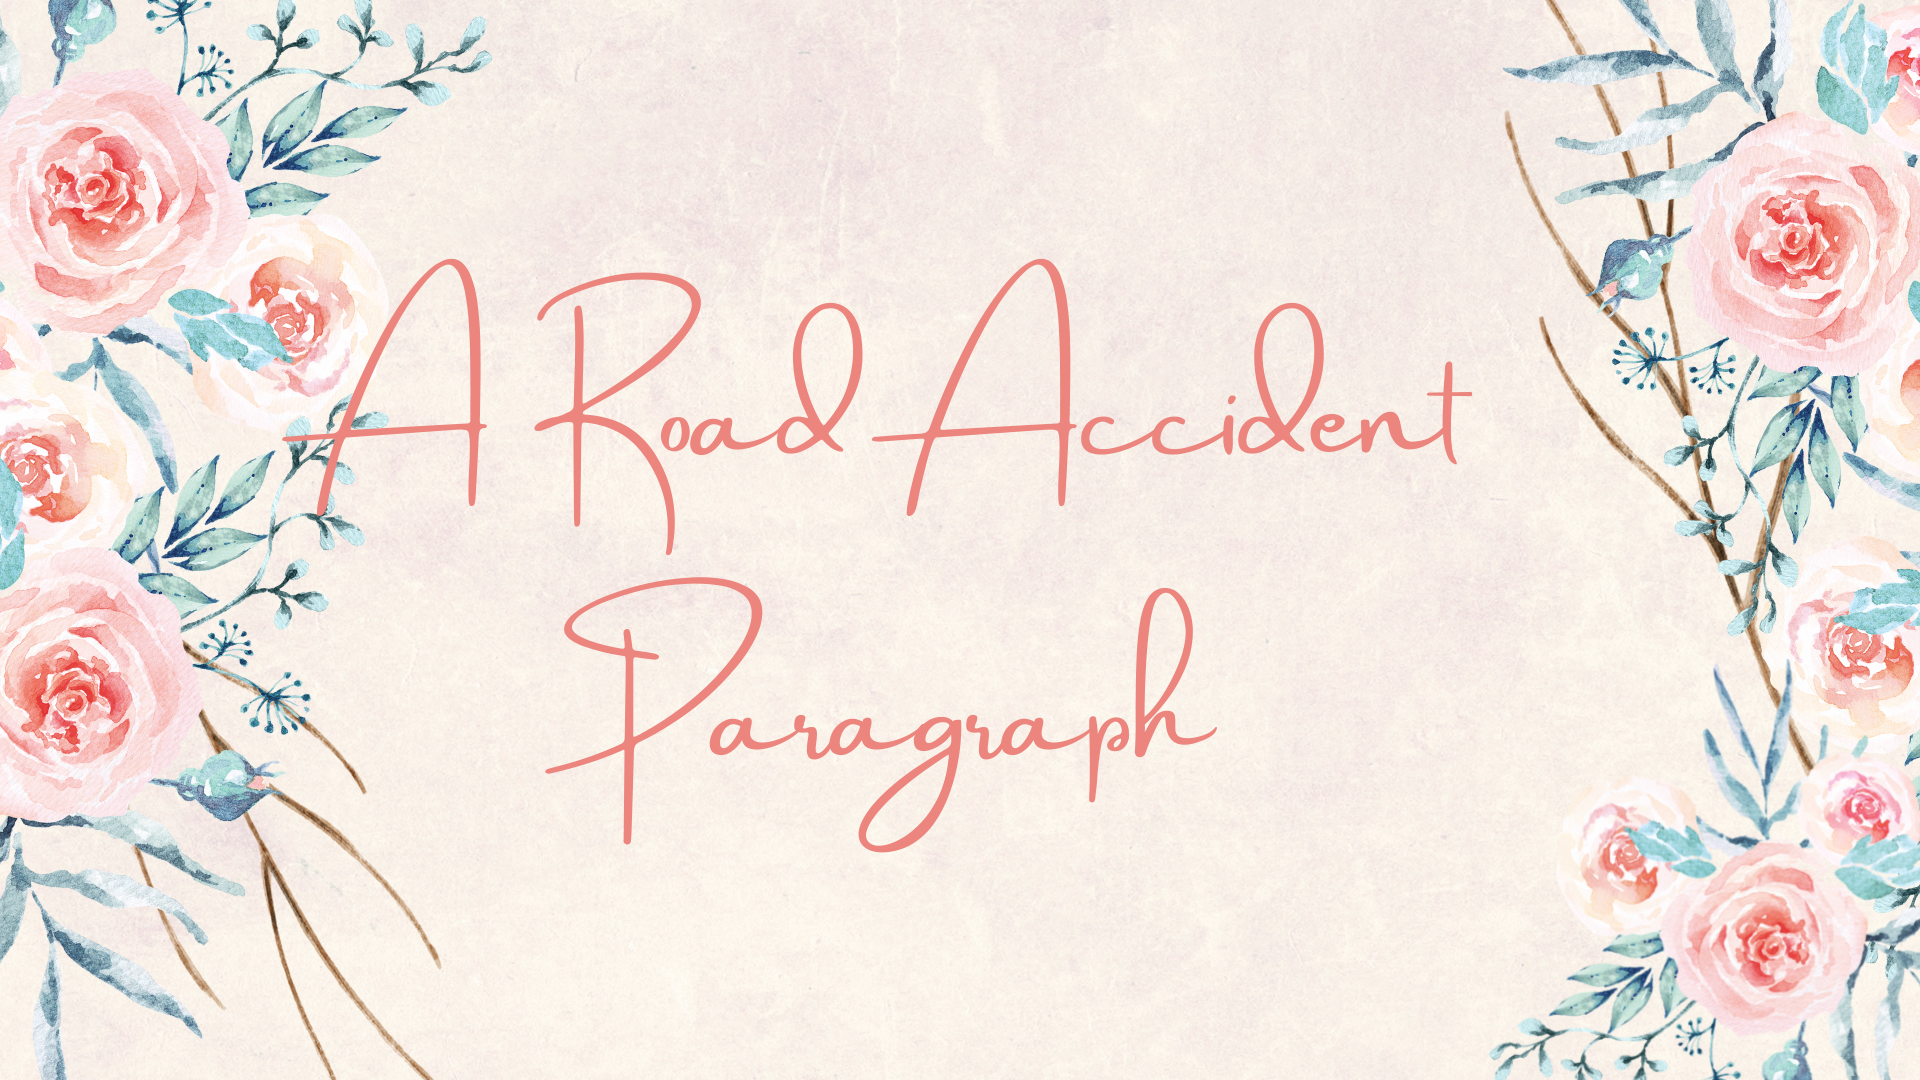 A Road Accident paragraph